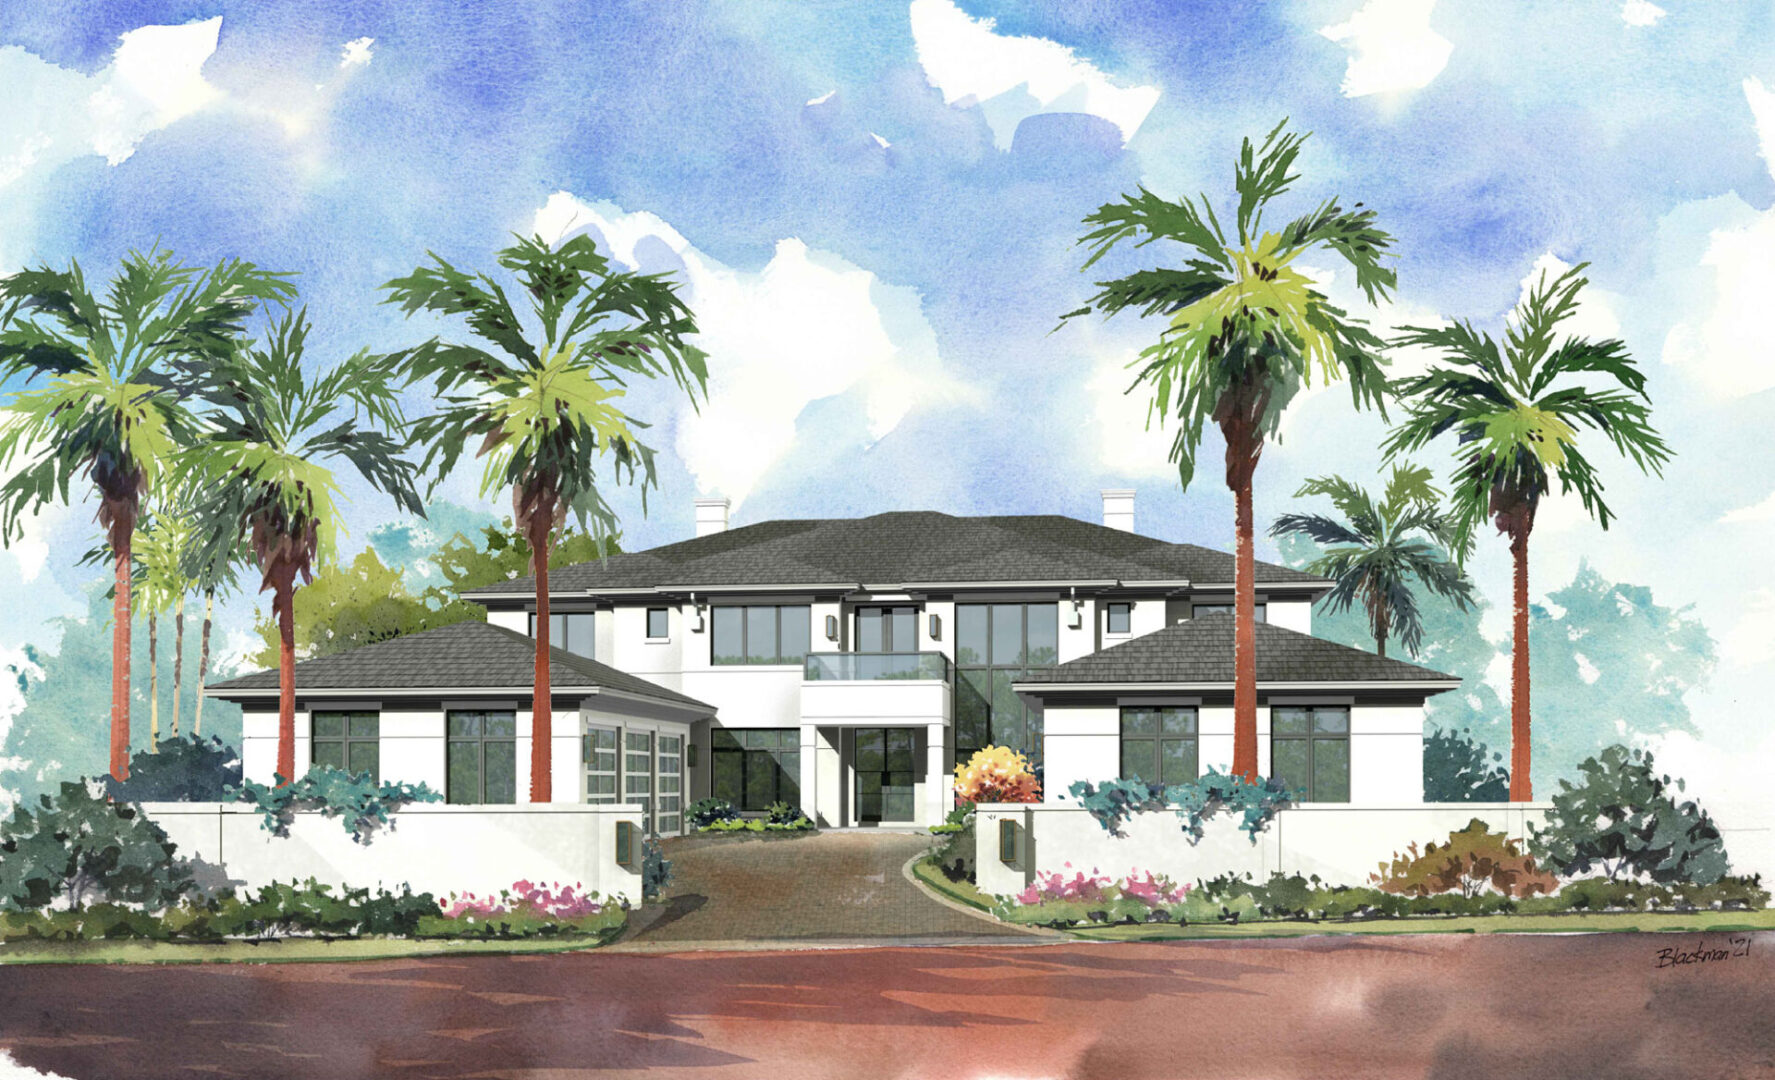 A painting of a house with palm trees in the background.